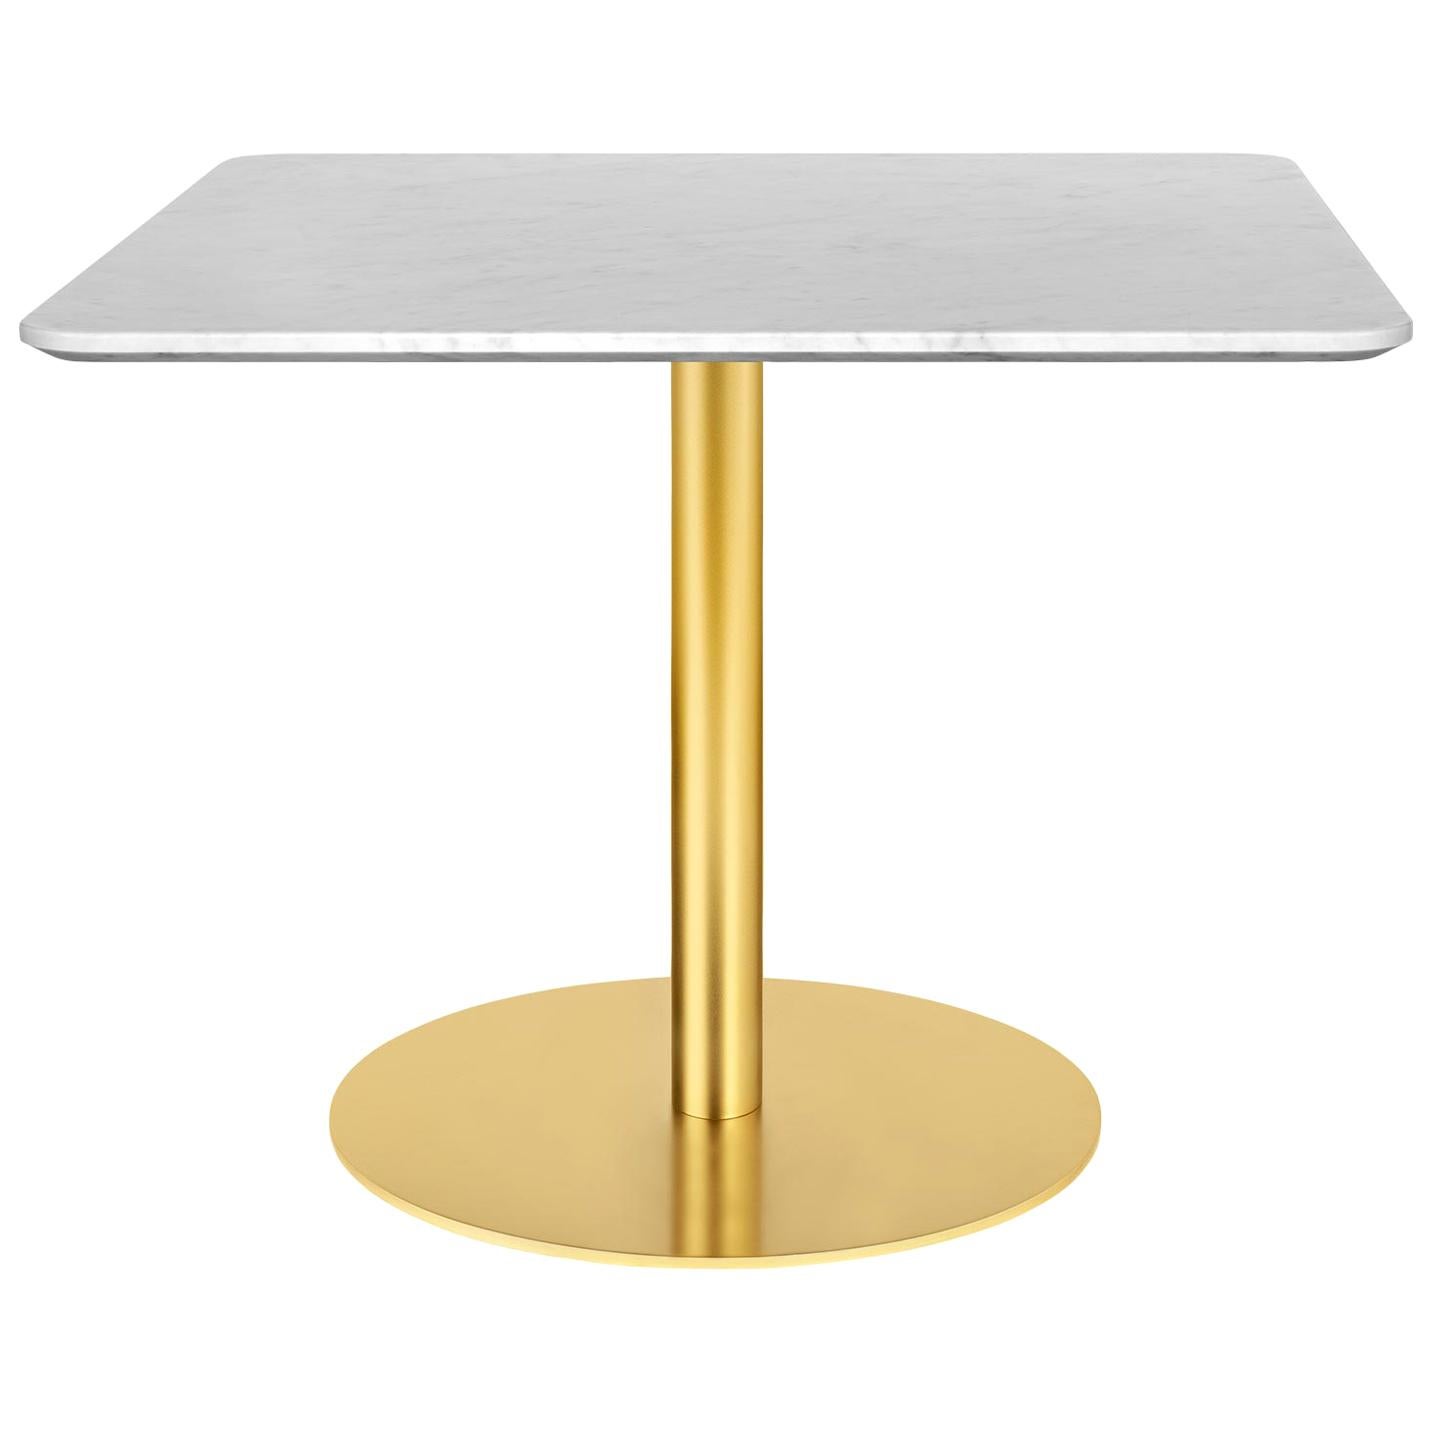 1.0 Lounge Table, Square, Round Brass Base, Large, Glass